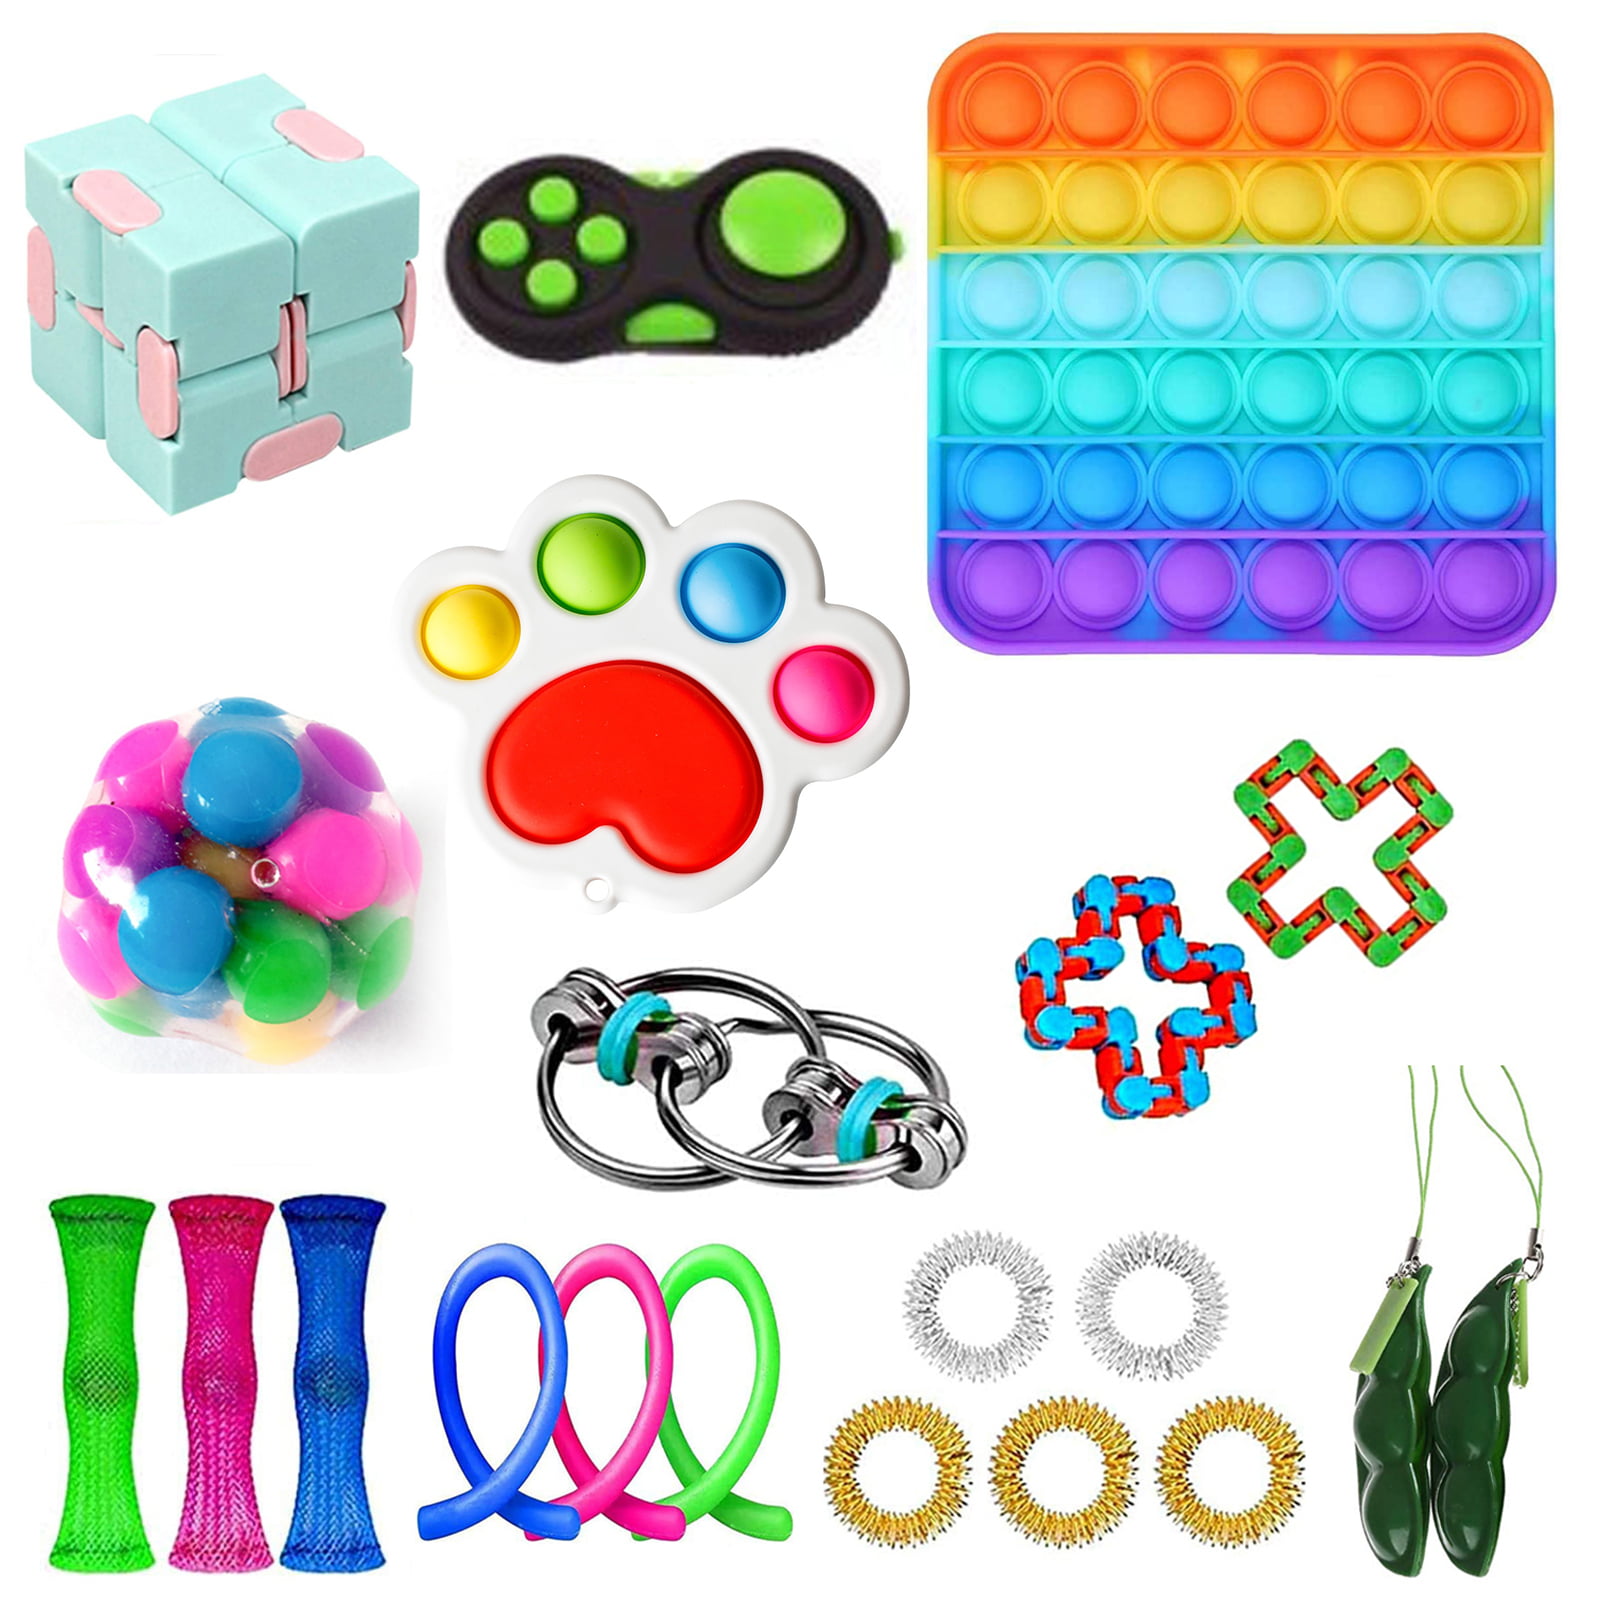 Details about   7PC Figet Fidget Toy Anti Stress Anxiety Toy Set Adults Kids Autism Finger Toy 